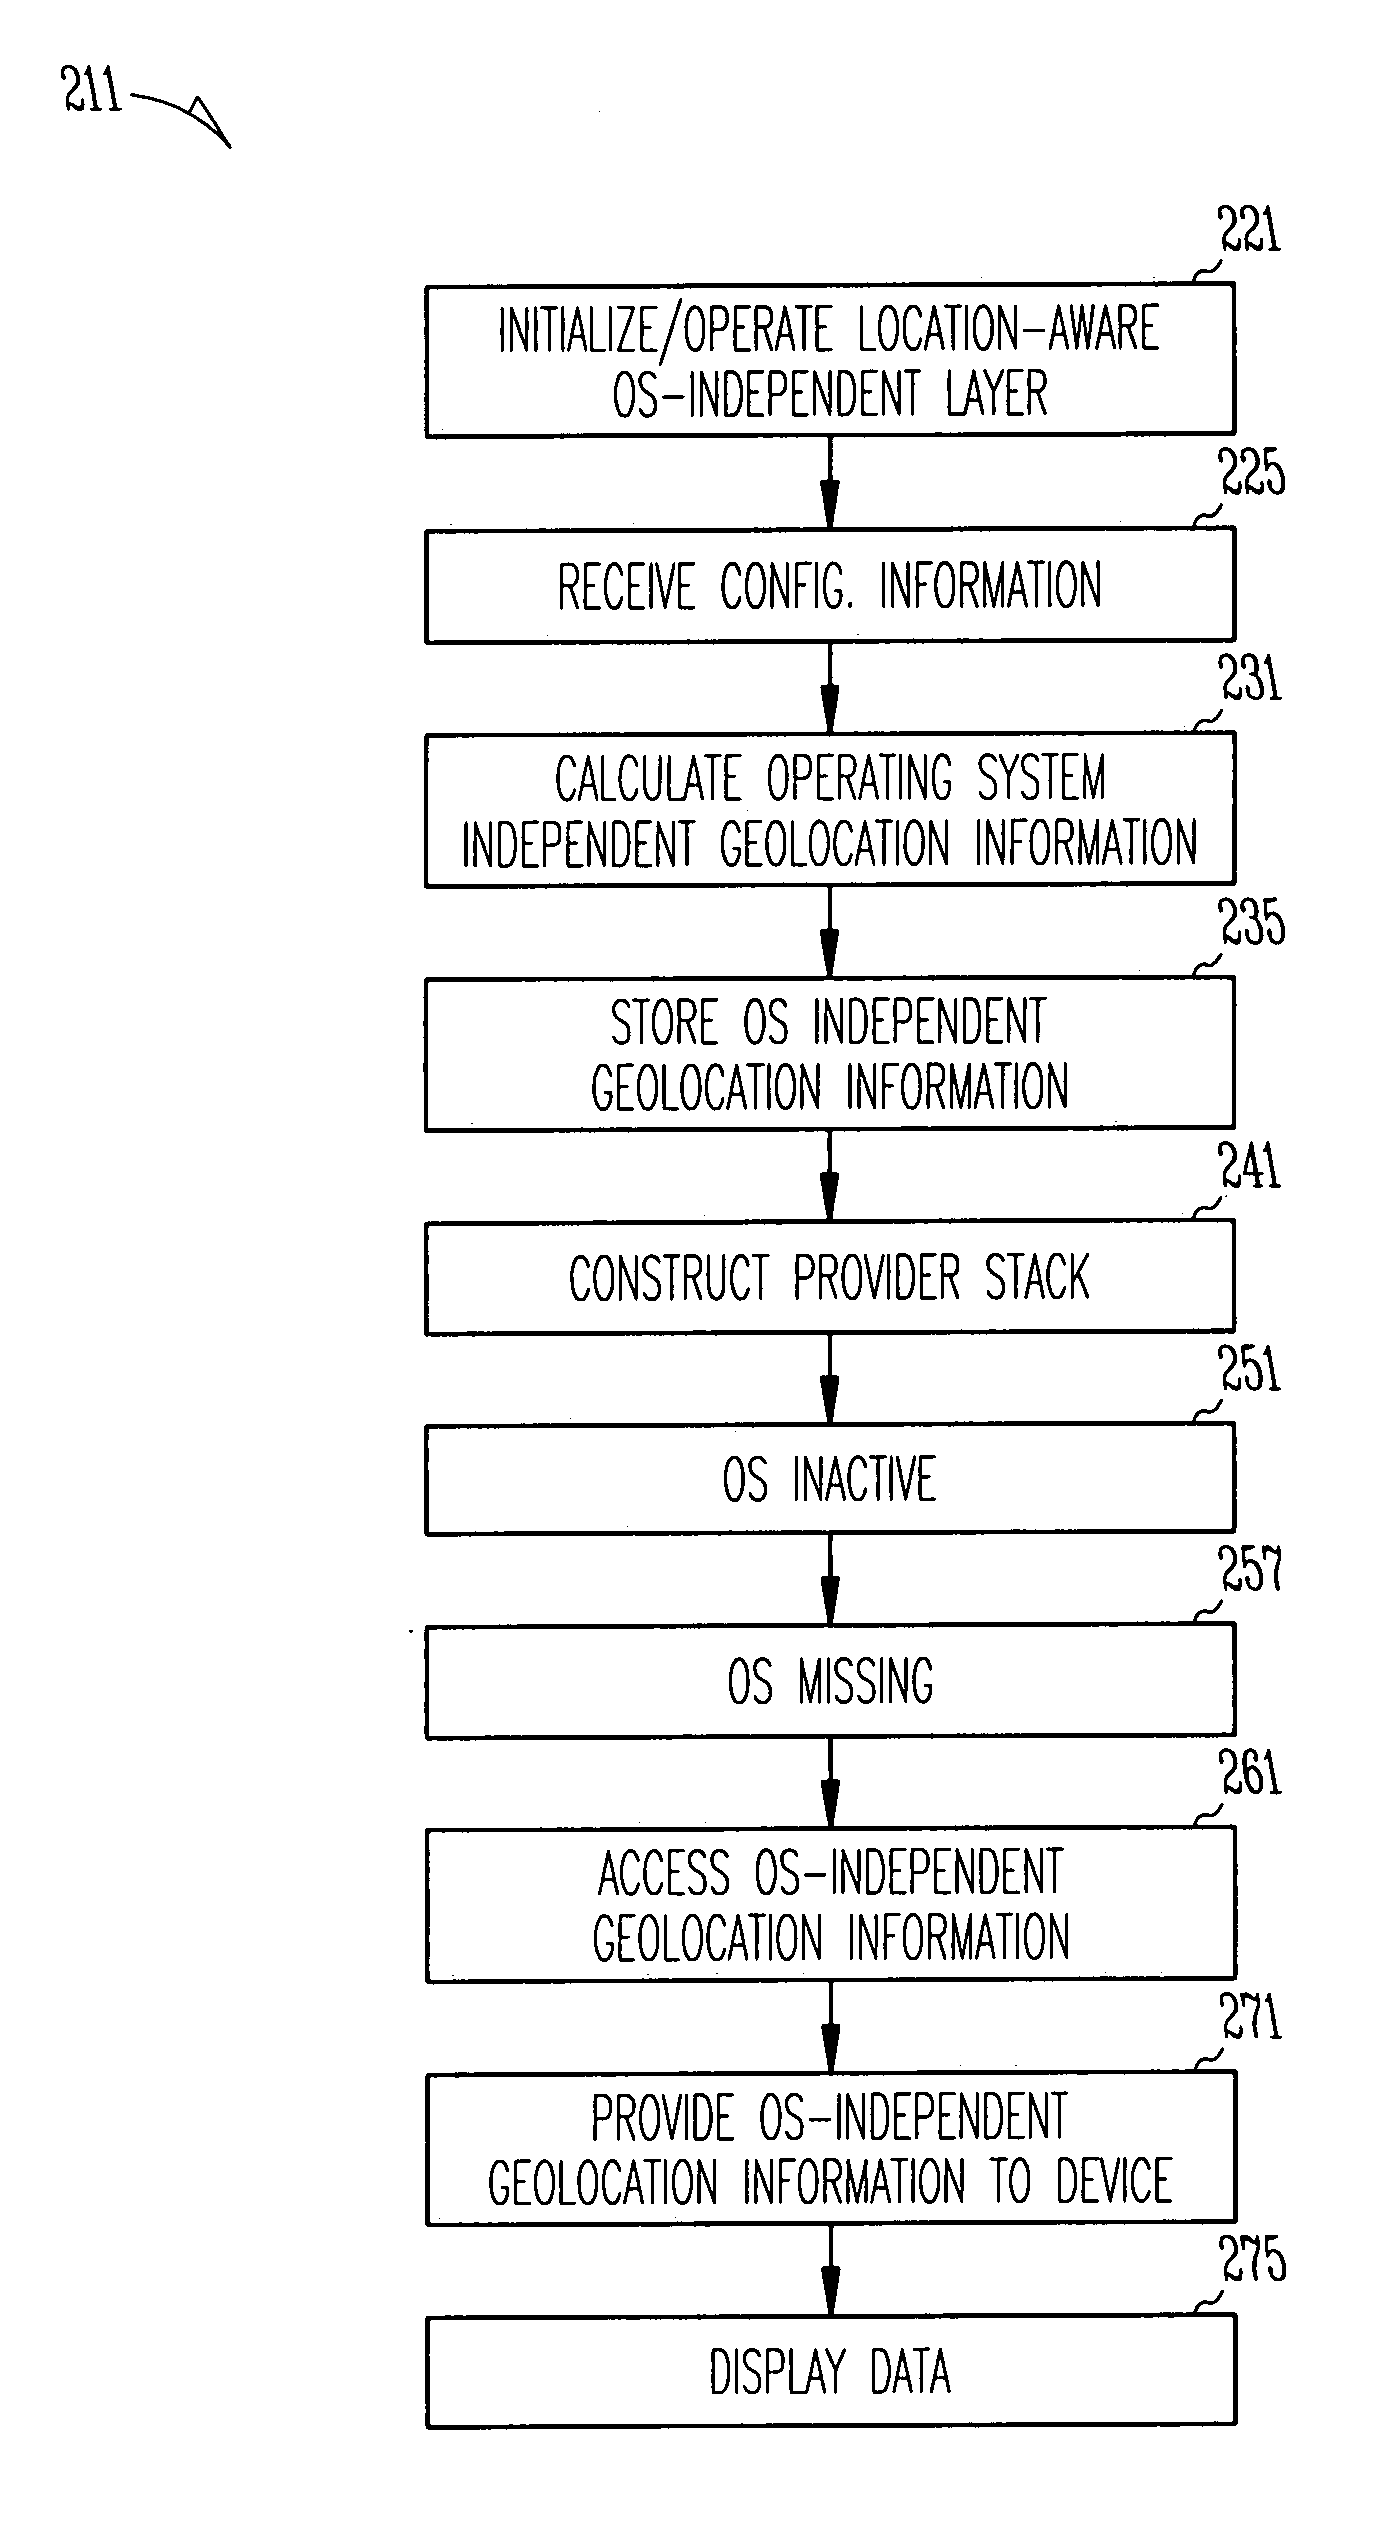 Location processing apparatus, systems, and methods